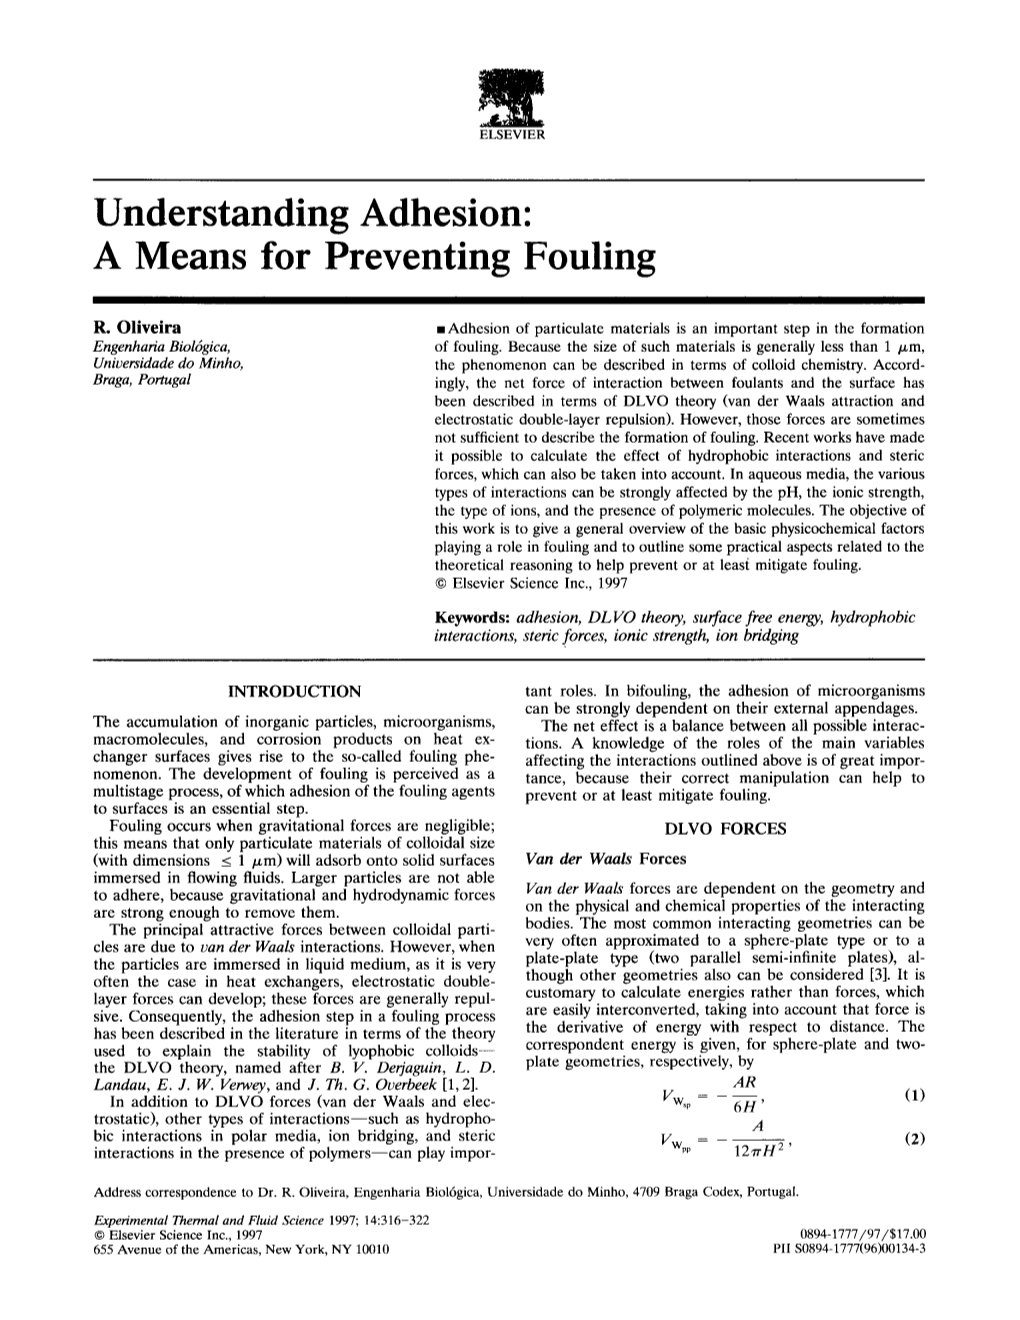 Understanding Adhesion: a Means for Preventing Fouling